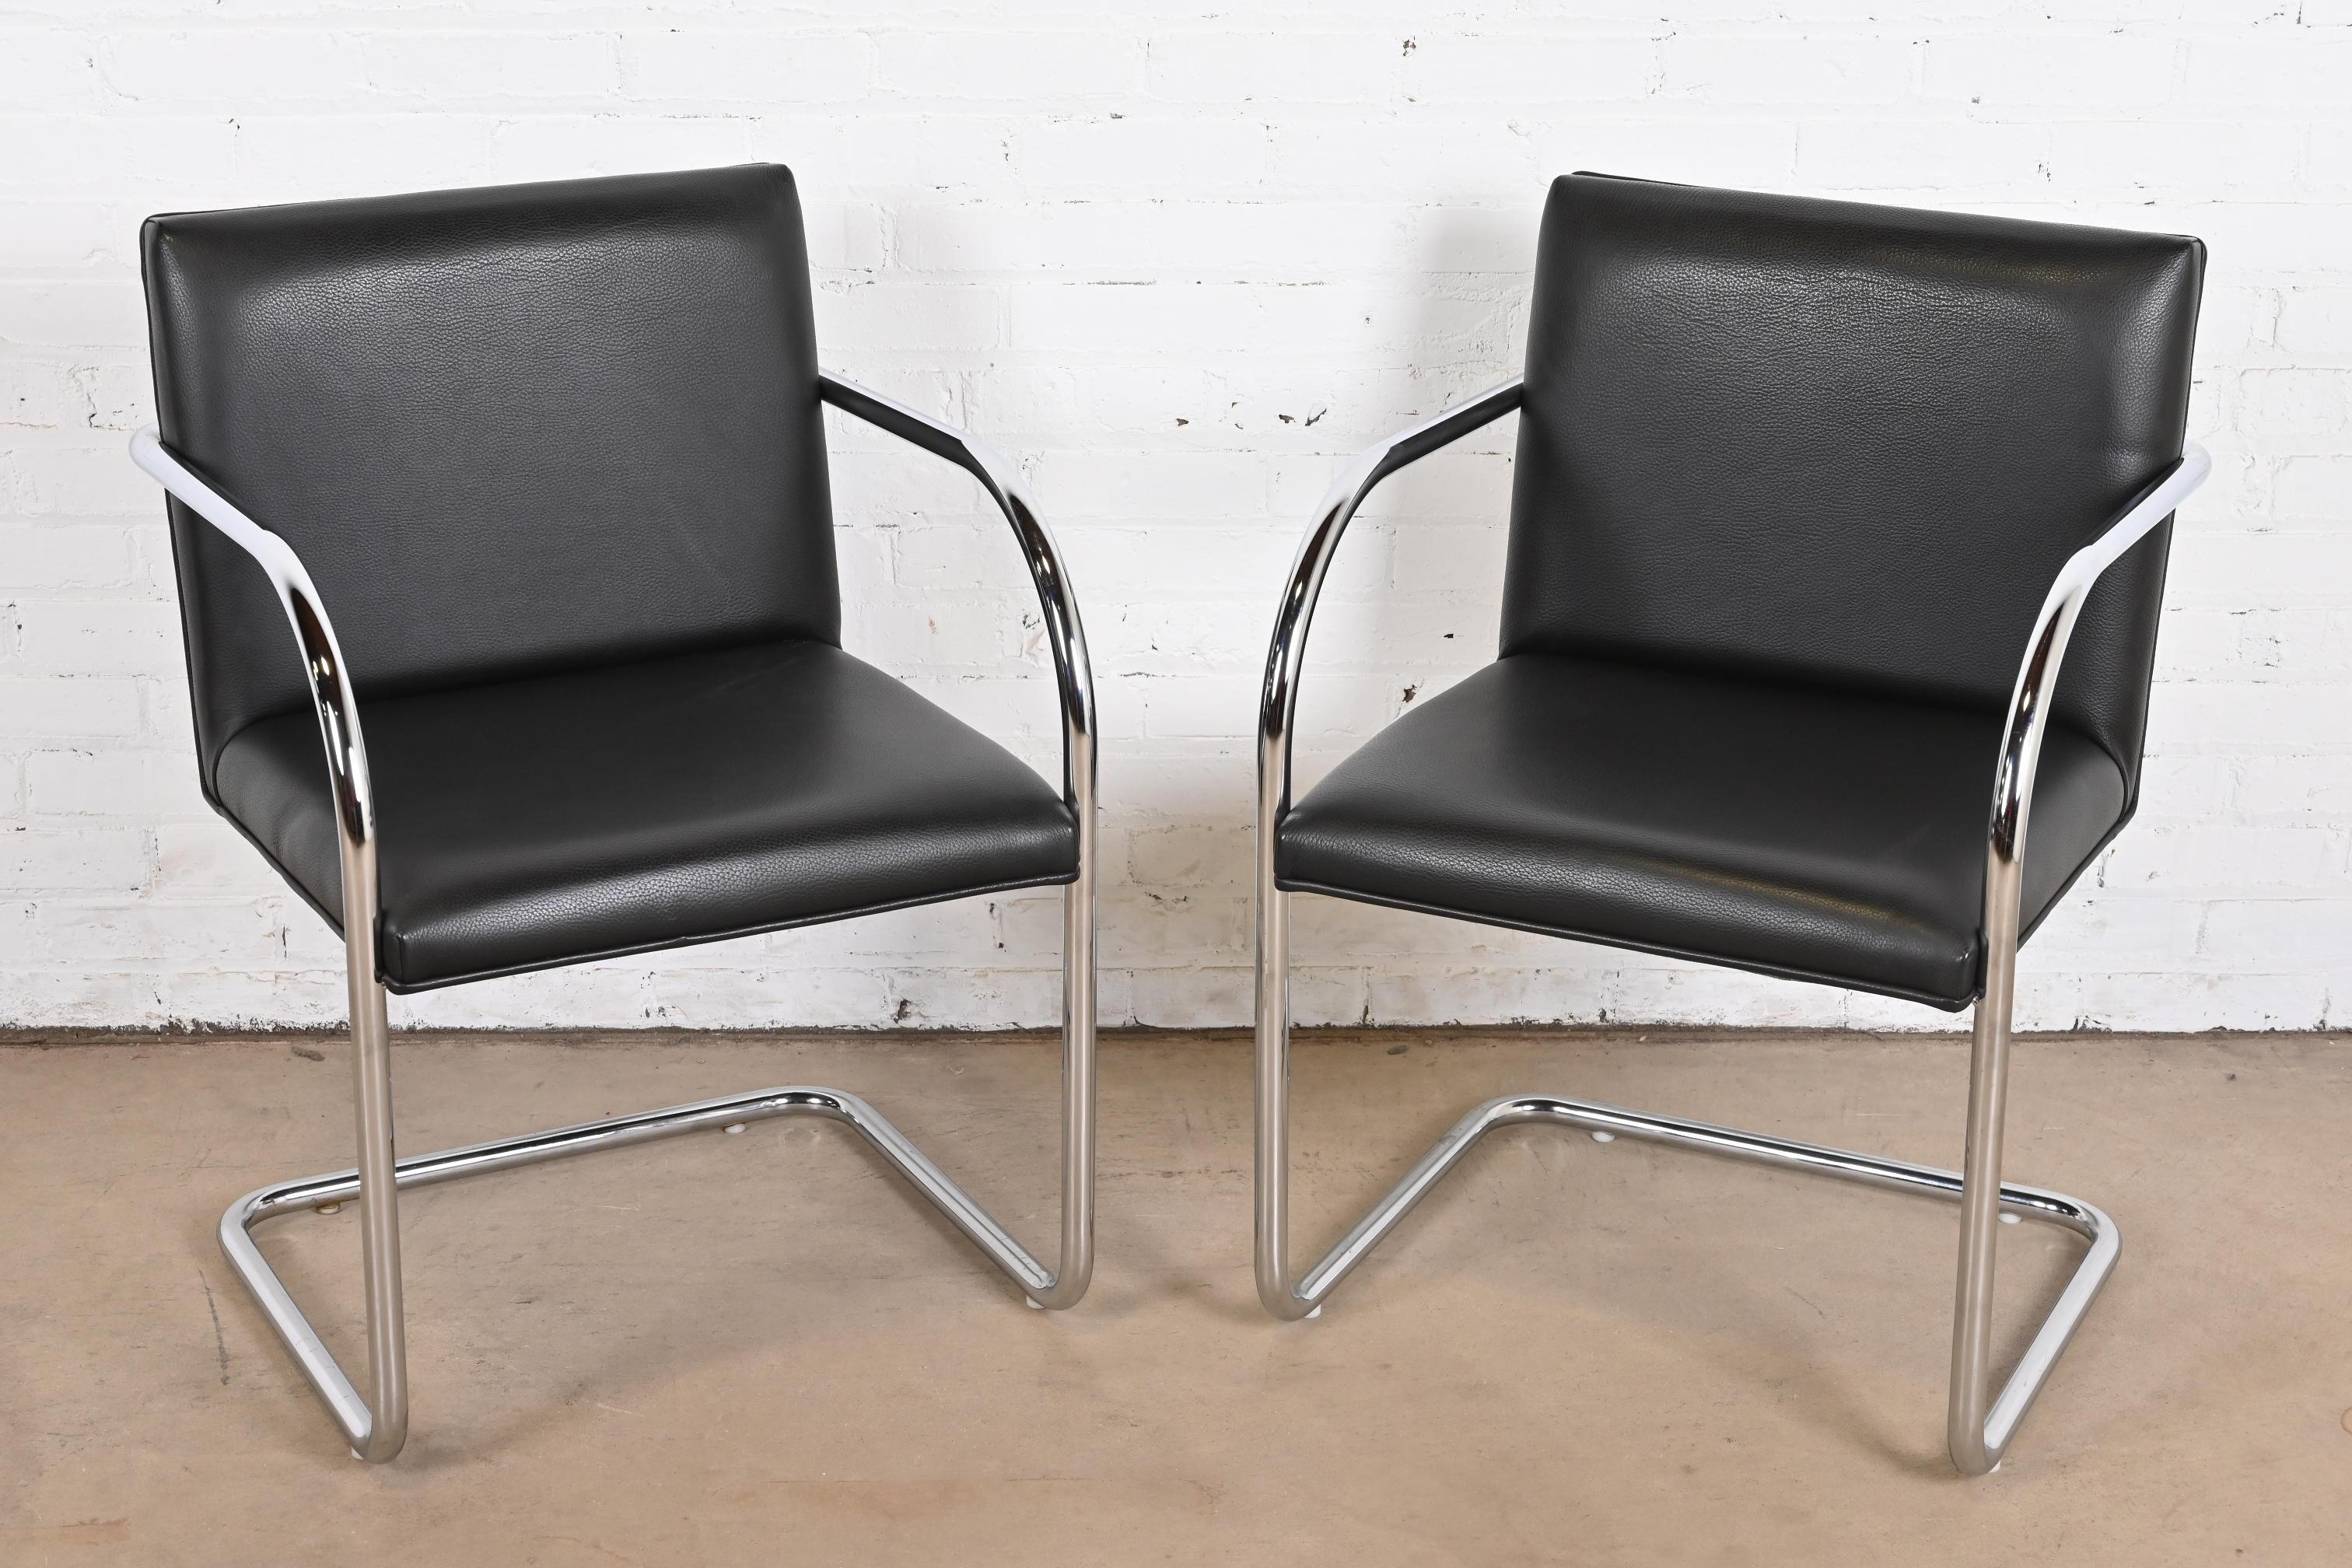 An exceptional pair of Mid-Century Modern Brno tubular club or lounge chairs

Designed by Ludwig Mies van der Rohe in 1930 for the Tugendhat House

Produced by Gordon International

USA, Late 20th Century

Cantilevered chrome-plated steel frames,